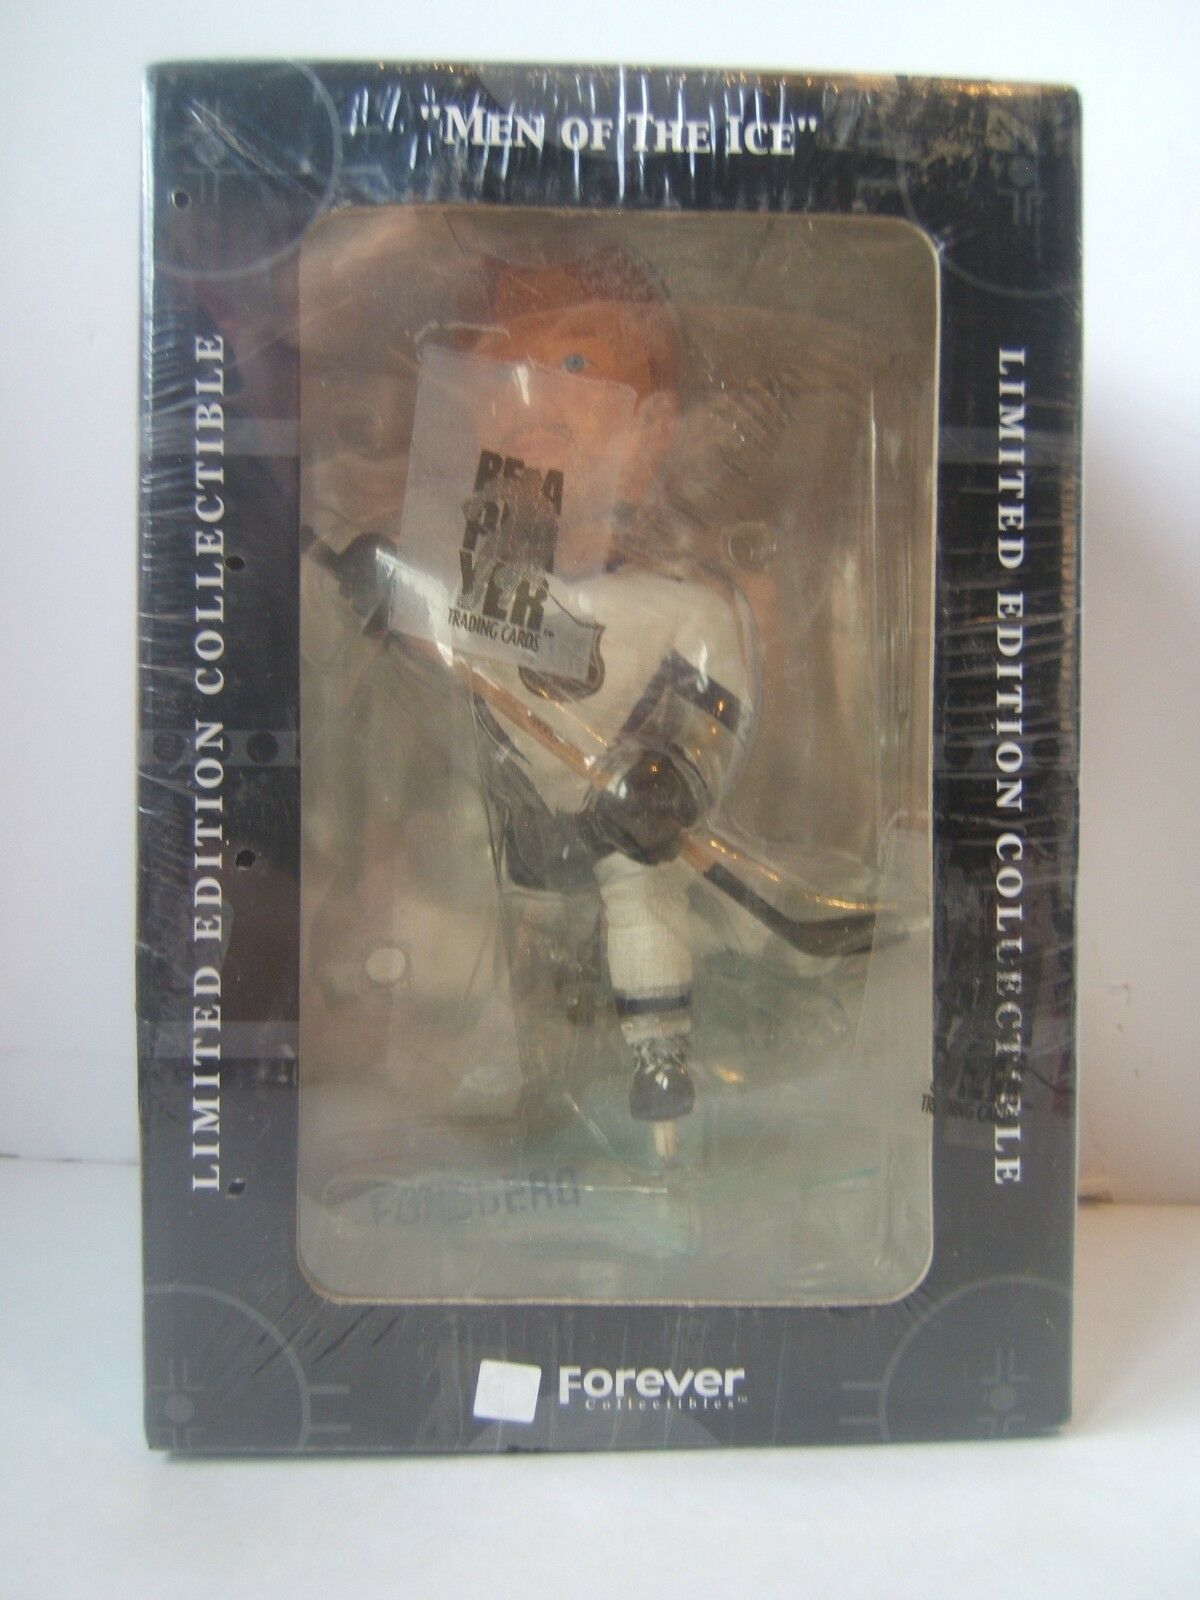 Peter Forsberg Men of the Ice Sealed Limited Edition Bobble Head NHL Hockey 2002 - $16.01